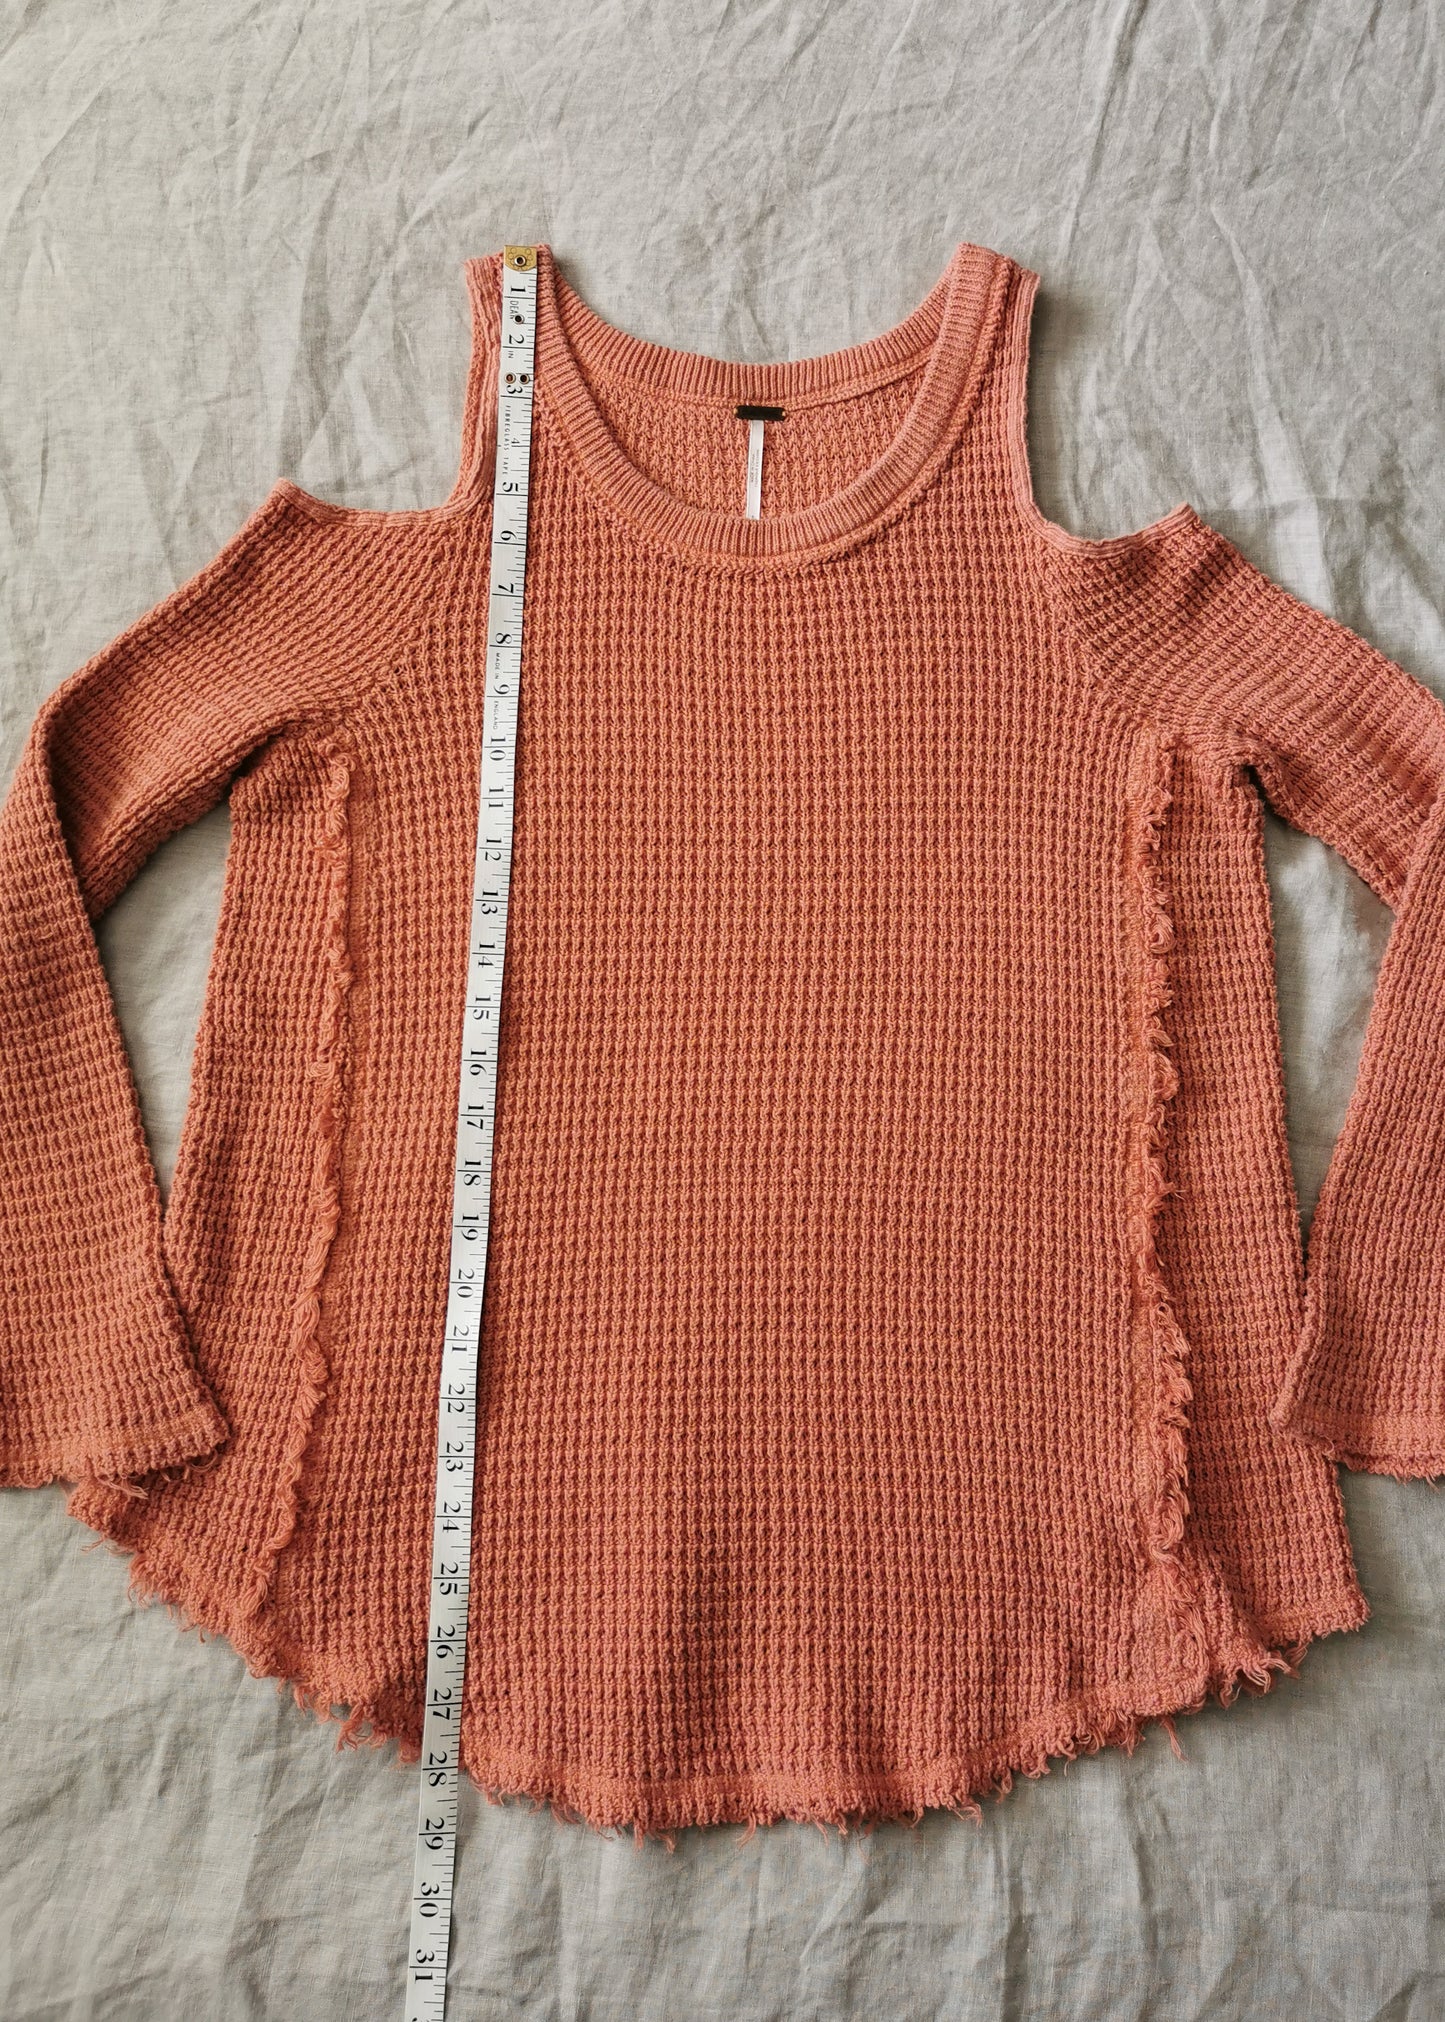 Free People Sunrise Sunset Cold Shoulder Cotton Thermal Sweater (S)